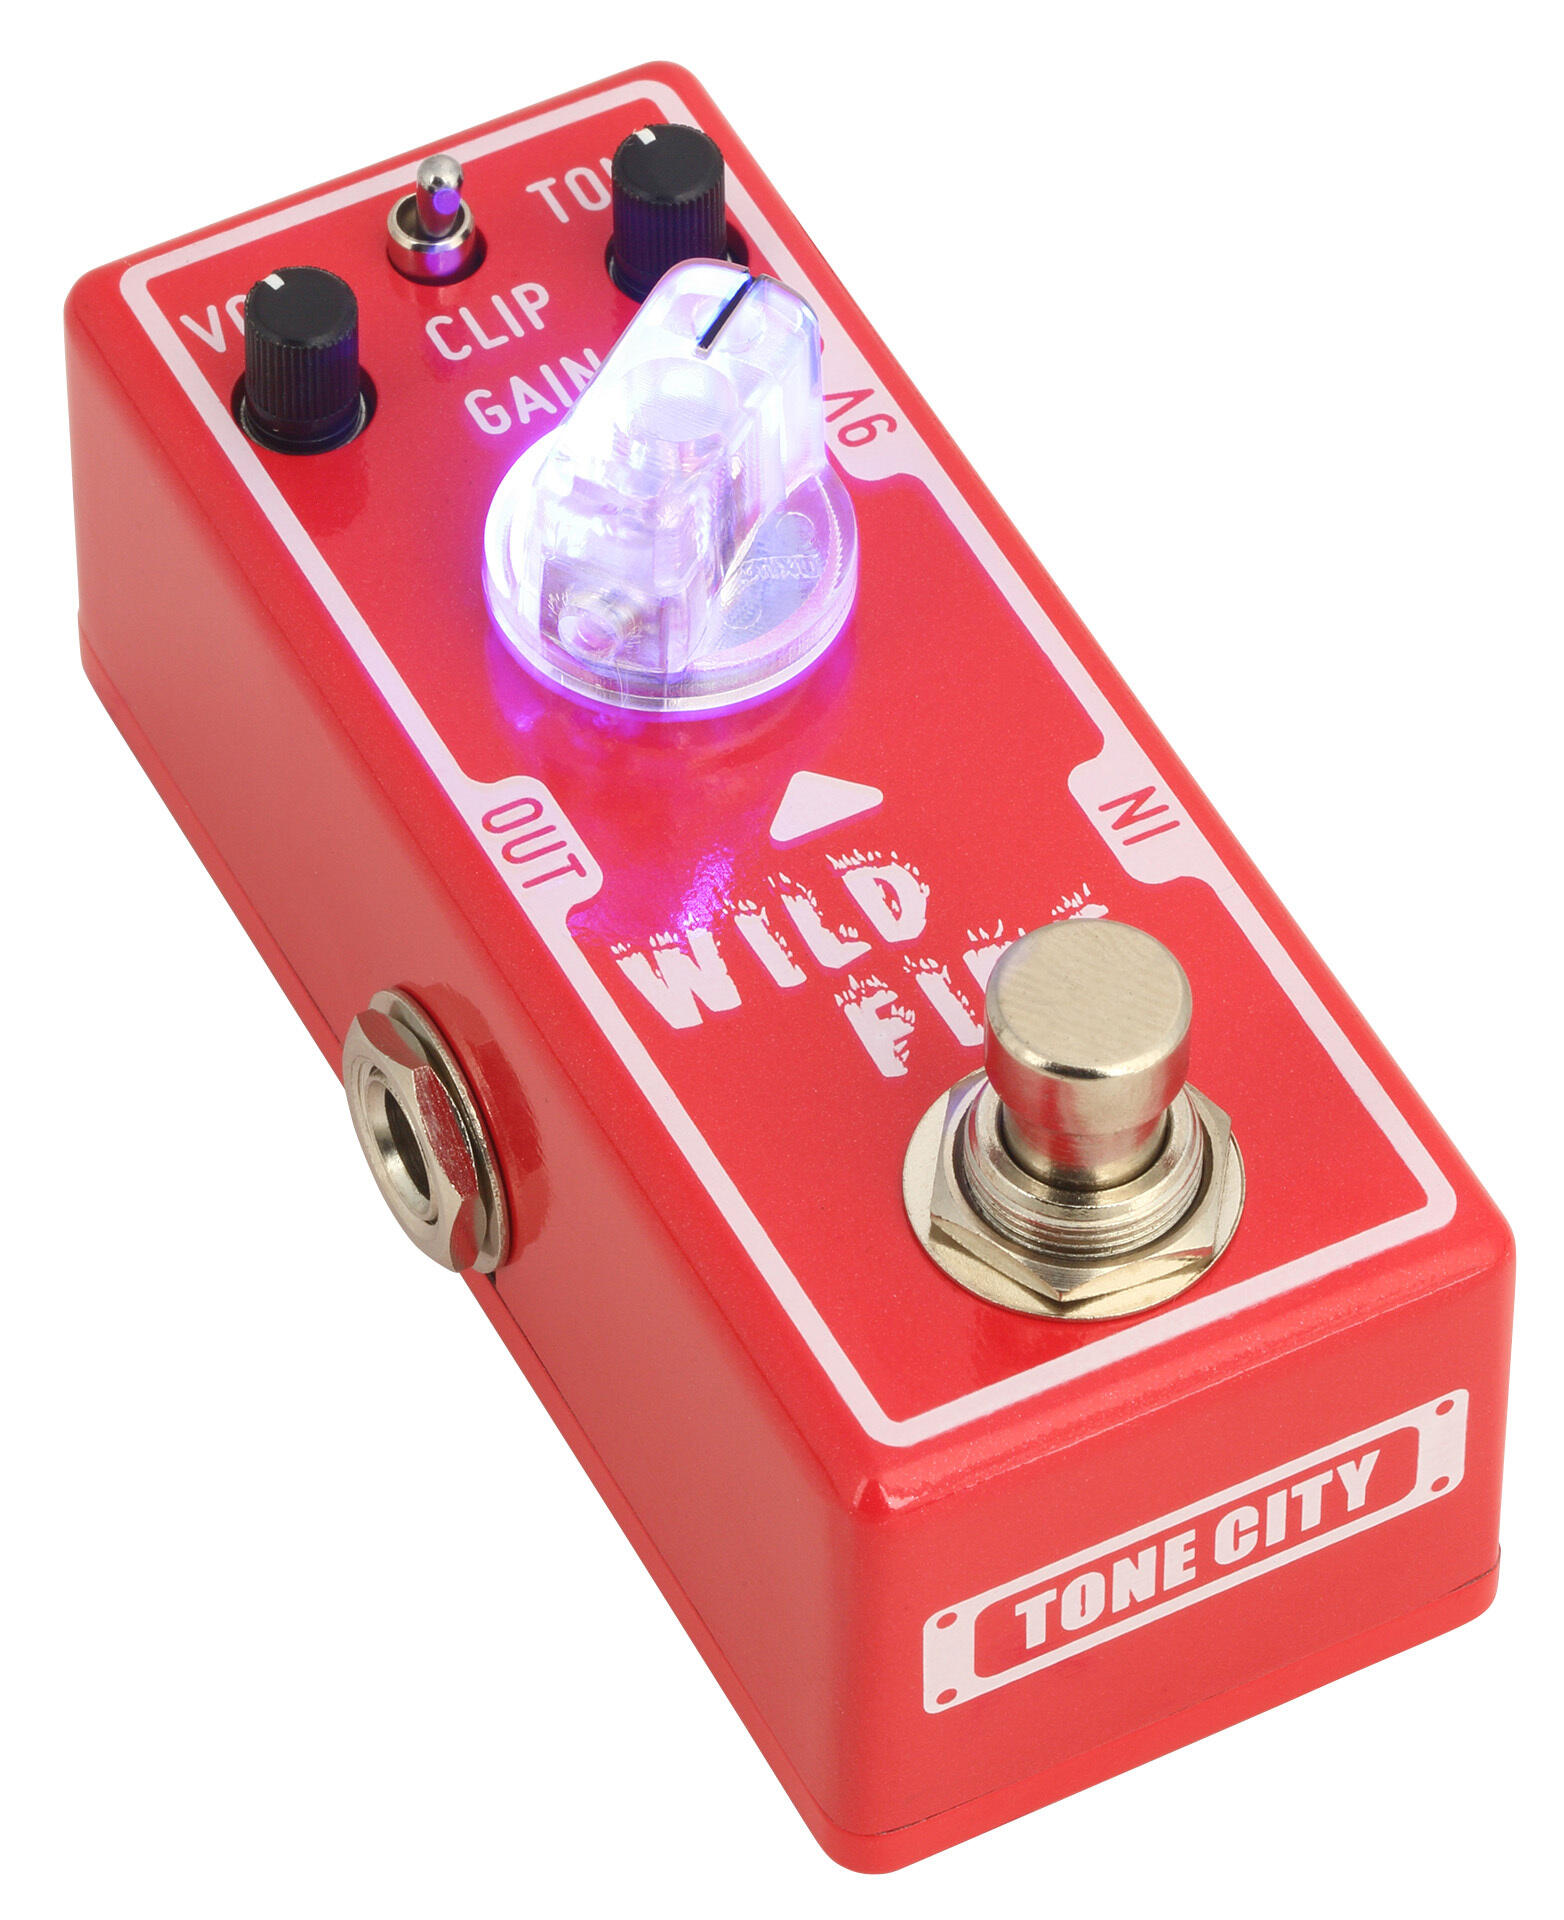 Tone City Audio Wild Fire Distortion T-m Mini - Overdrive, distortion & fuzz effect pedal - Variation 1